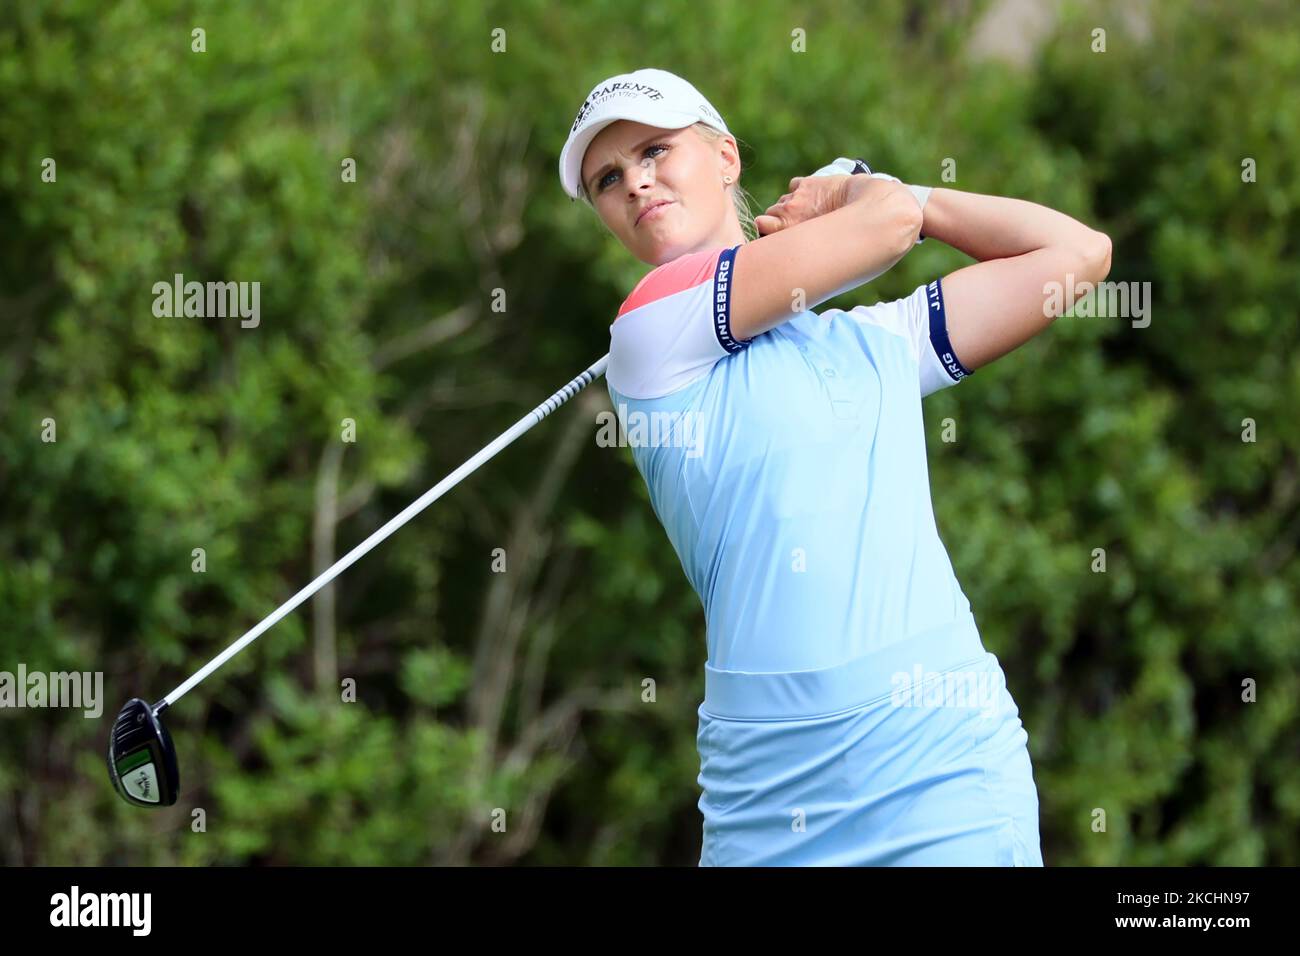 Louise Ridderstrom of Stockshund, Sweden hits from the 16th tee during the second round of the Marathon LPGA Classic golf tournament at Highland Meadows Golf Club in Sylvania, Ohio, USA Friday, July 9, 2021. (Photo by Amy Lemus/NurPhoto) Stock Photo